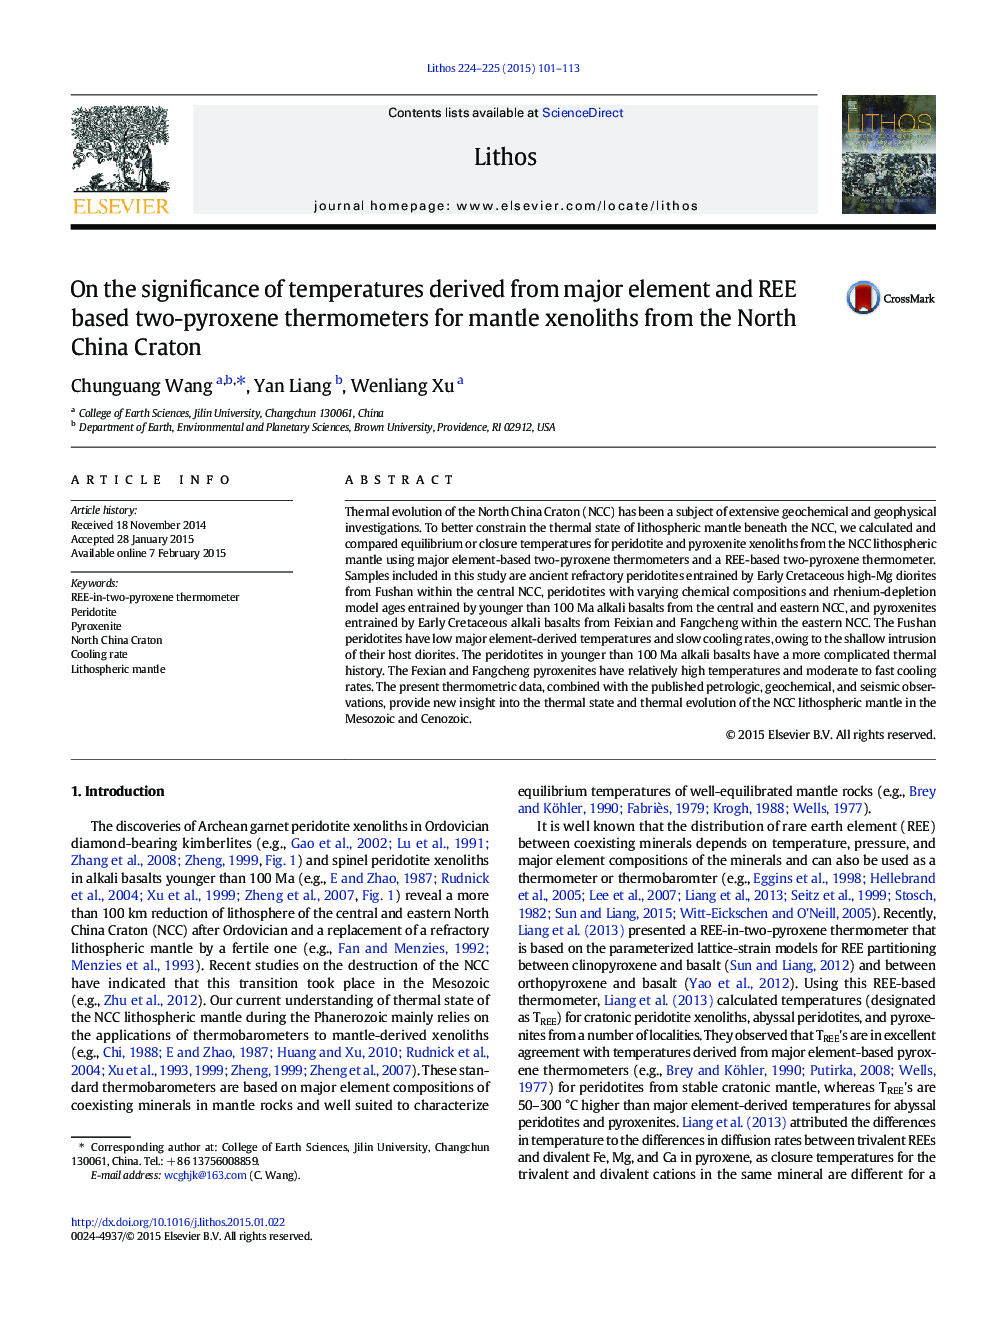 On the significance of temperatures derived from major element and REE based two-pyroxene thermometers for mantle xenoliths from the North China Craton